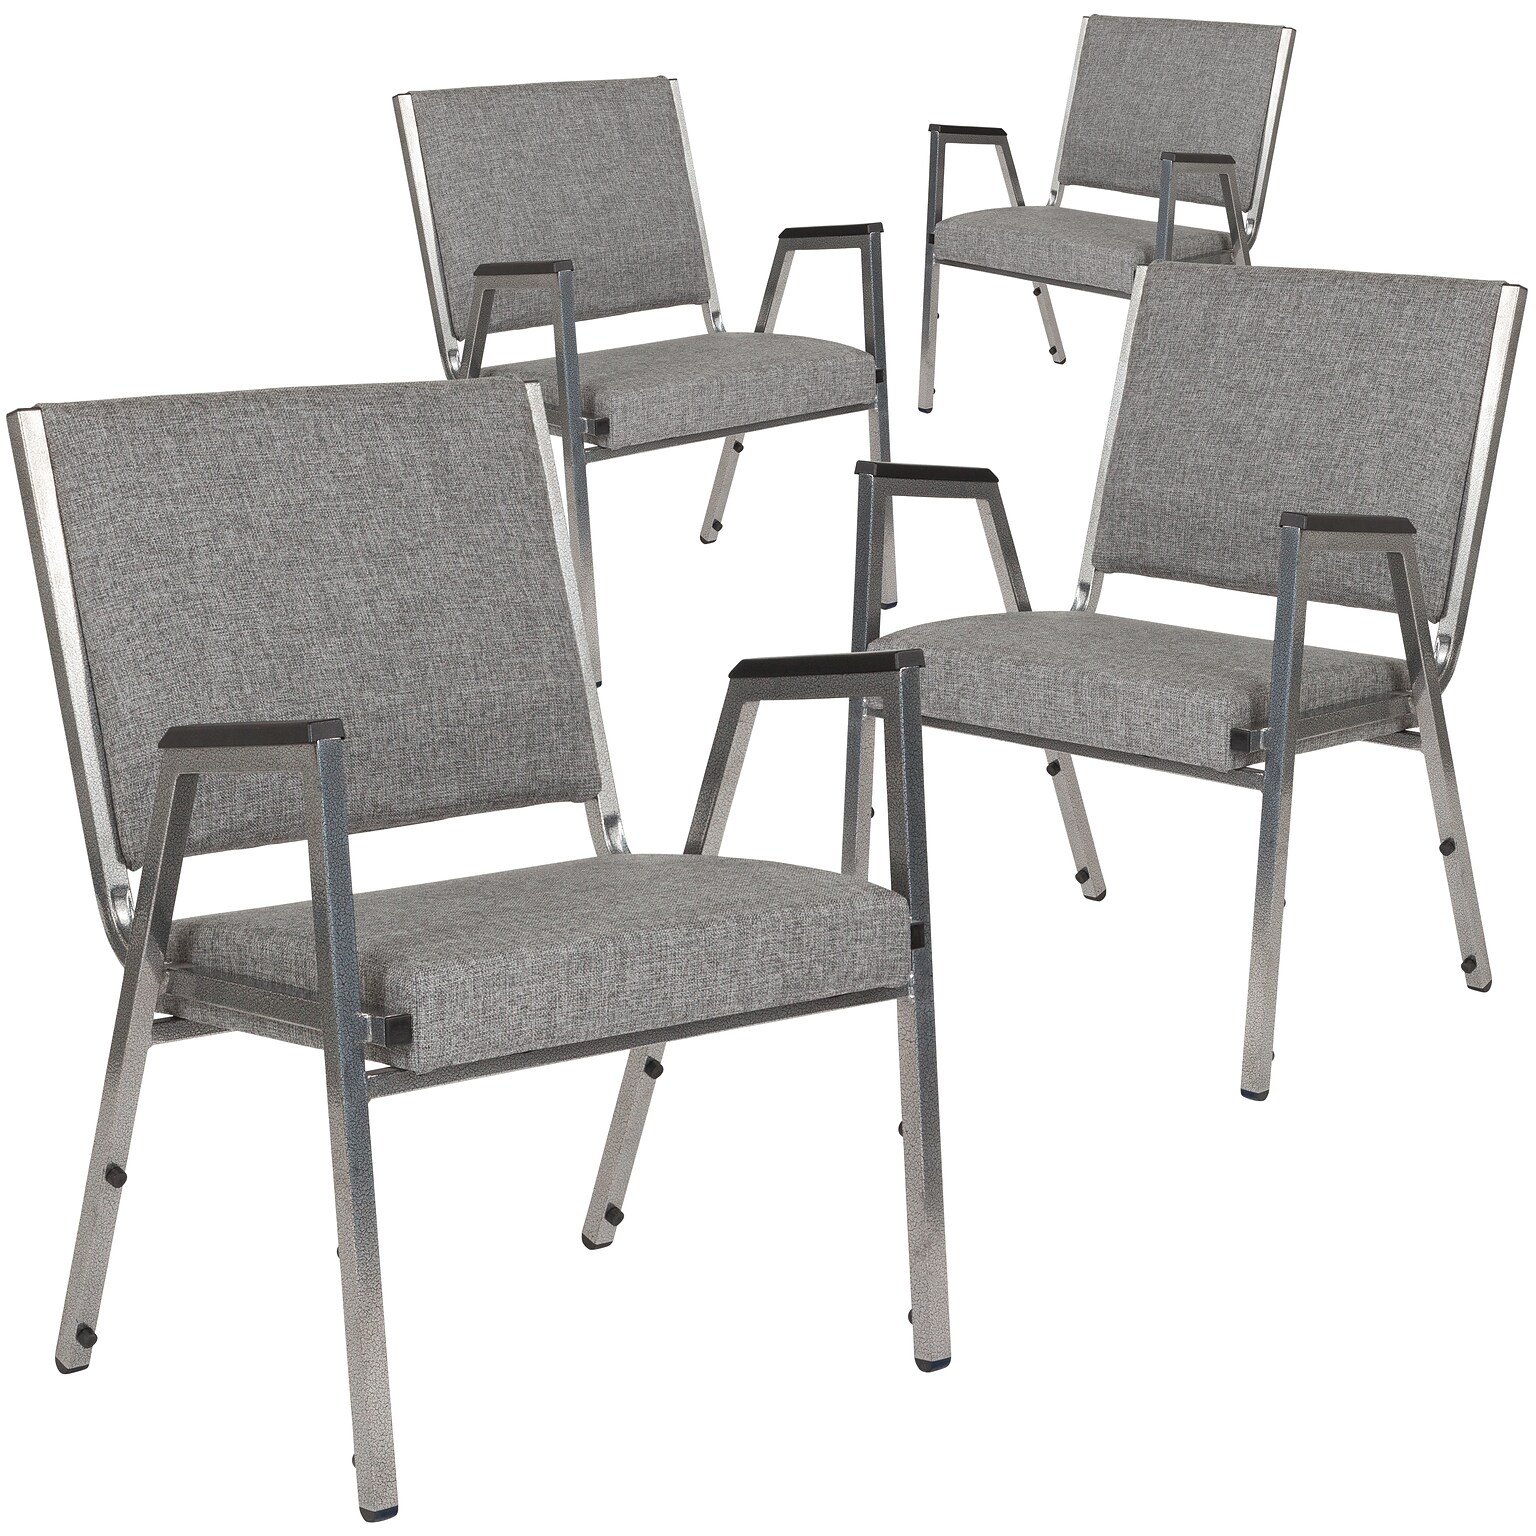 Flash Furniture Fabric Bariatric Medical Chair, Gray, Set of 4 (4XU604436701GY)